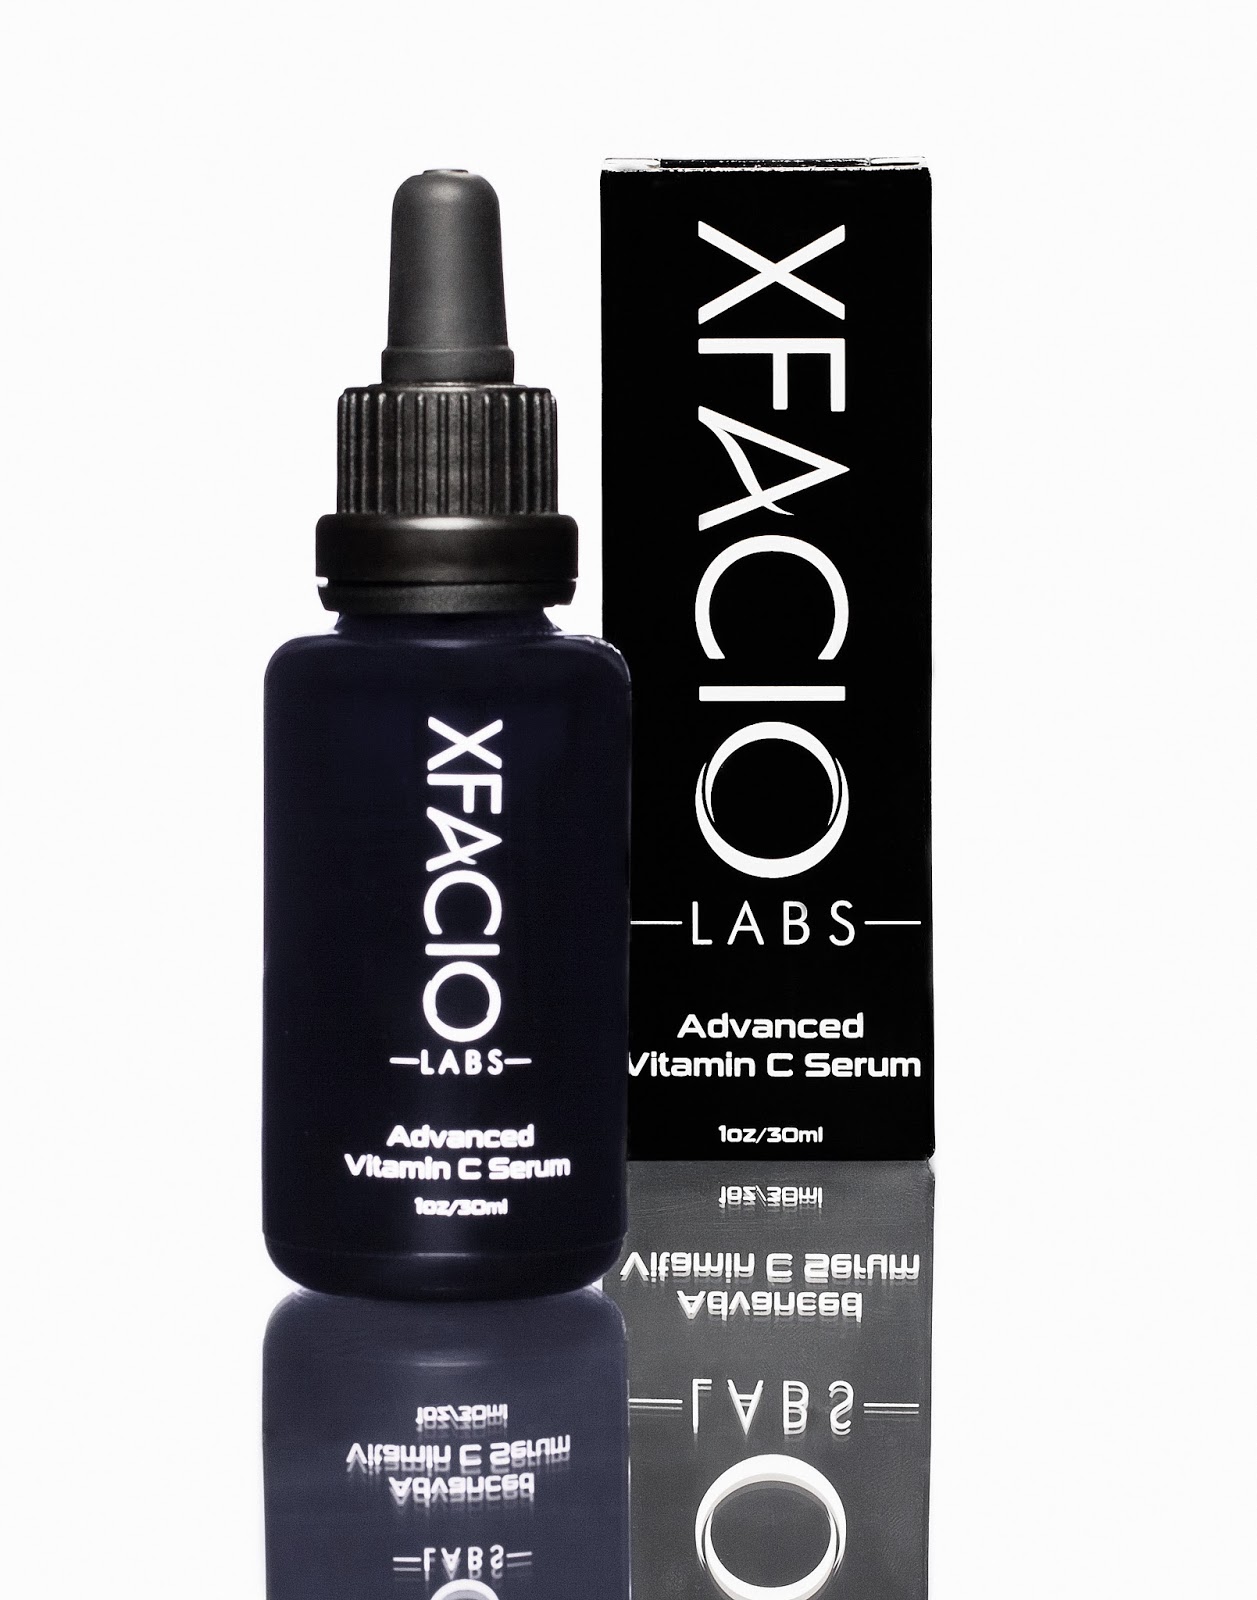 http://www.amazon.com/Xfacio-Labs-Concentrated-Benefits-Helps-Protection/dp/B00CHFRIDS/ie=UTF8?m=A1FNLPJRJA8L33&keywords=vitamin+c+serums&tag=xfacioantiaging2-20